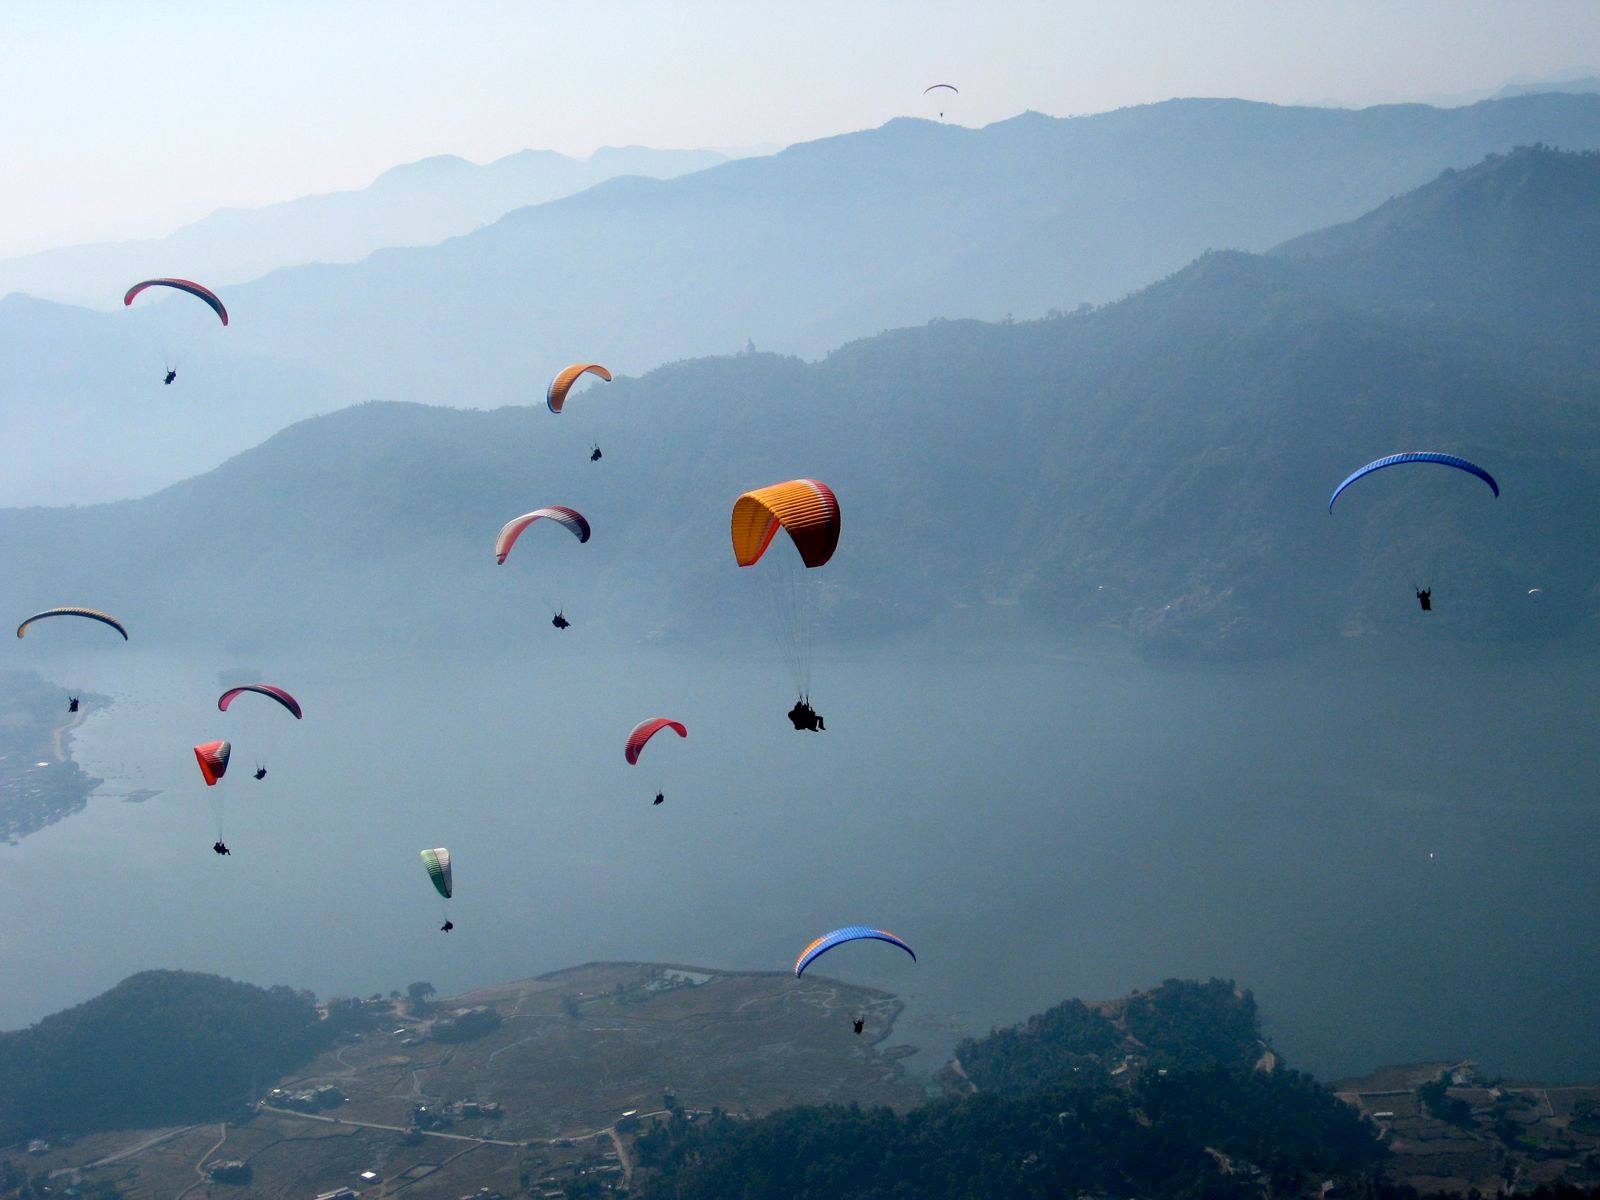 International paragliding competition at Bir from 24-30 October